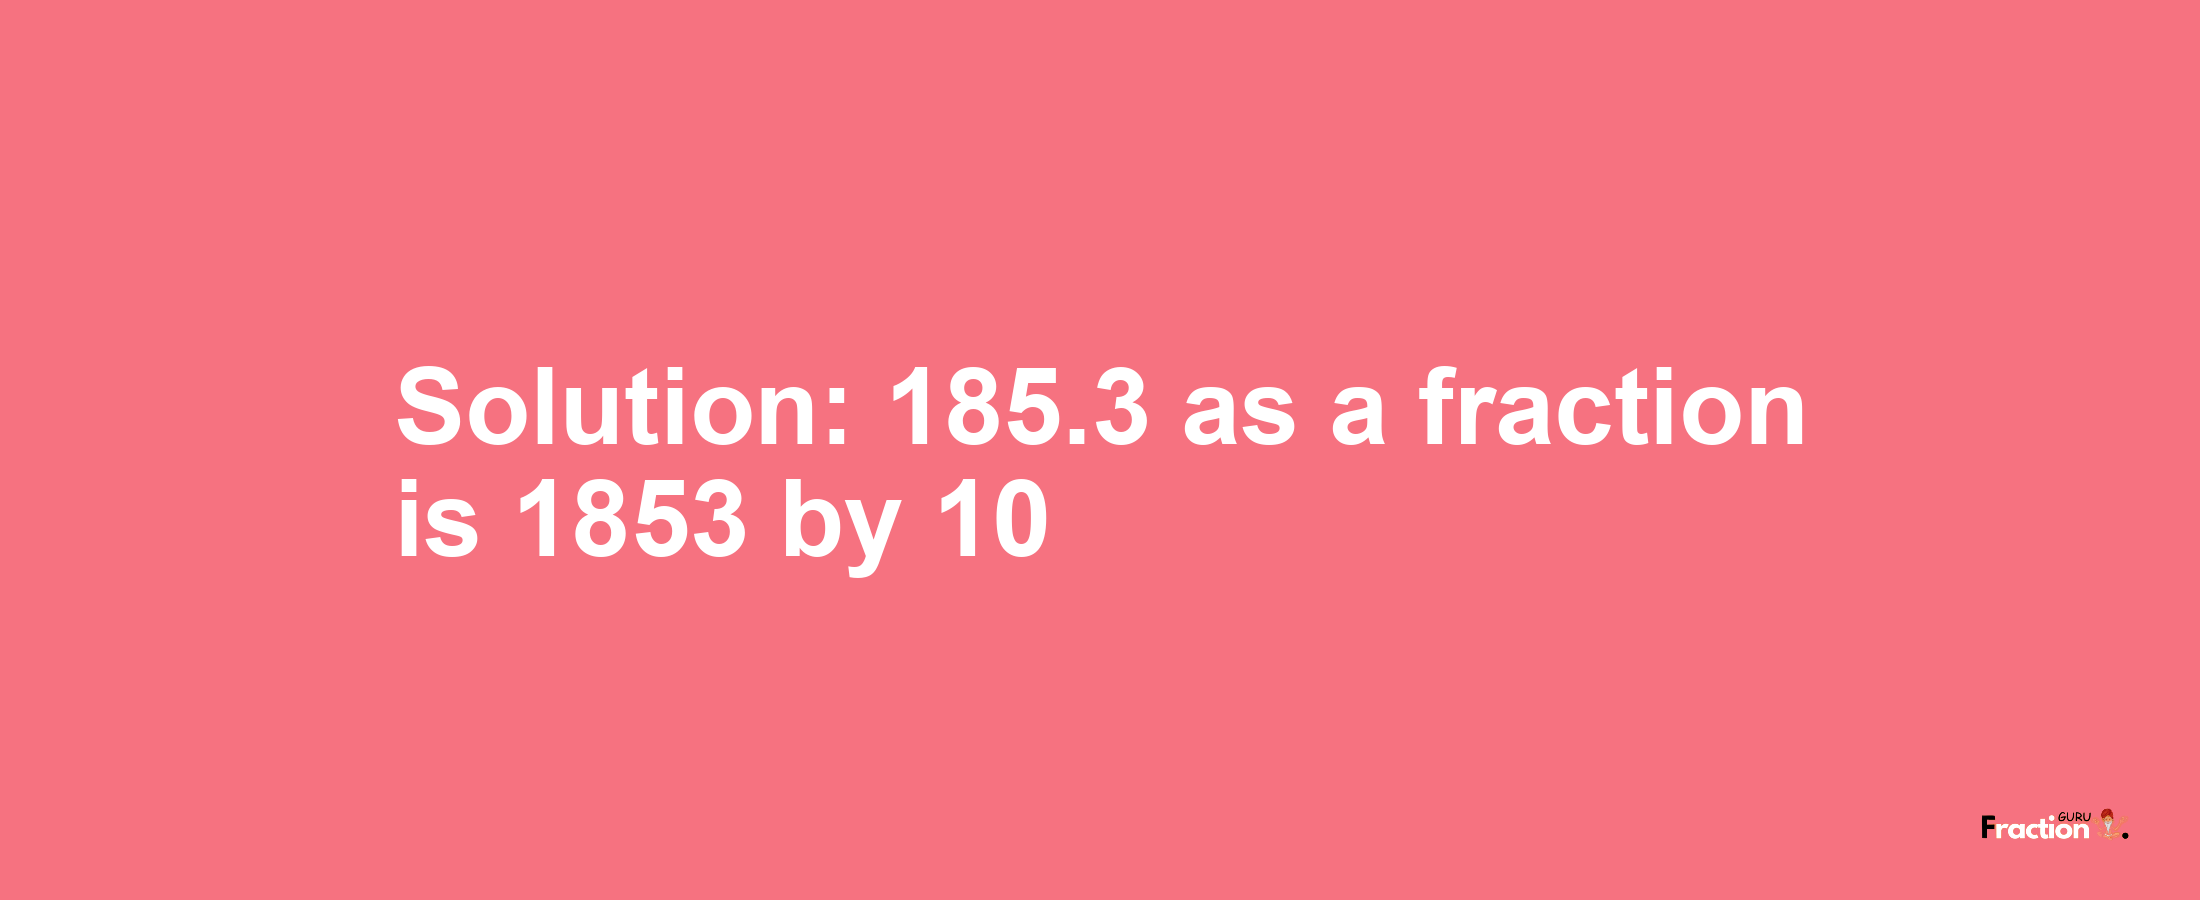 Solution:185.3 as a fraction is 1853/10